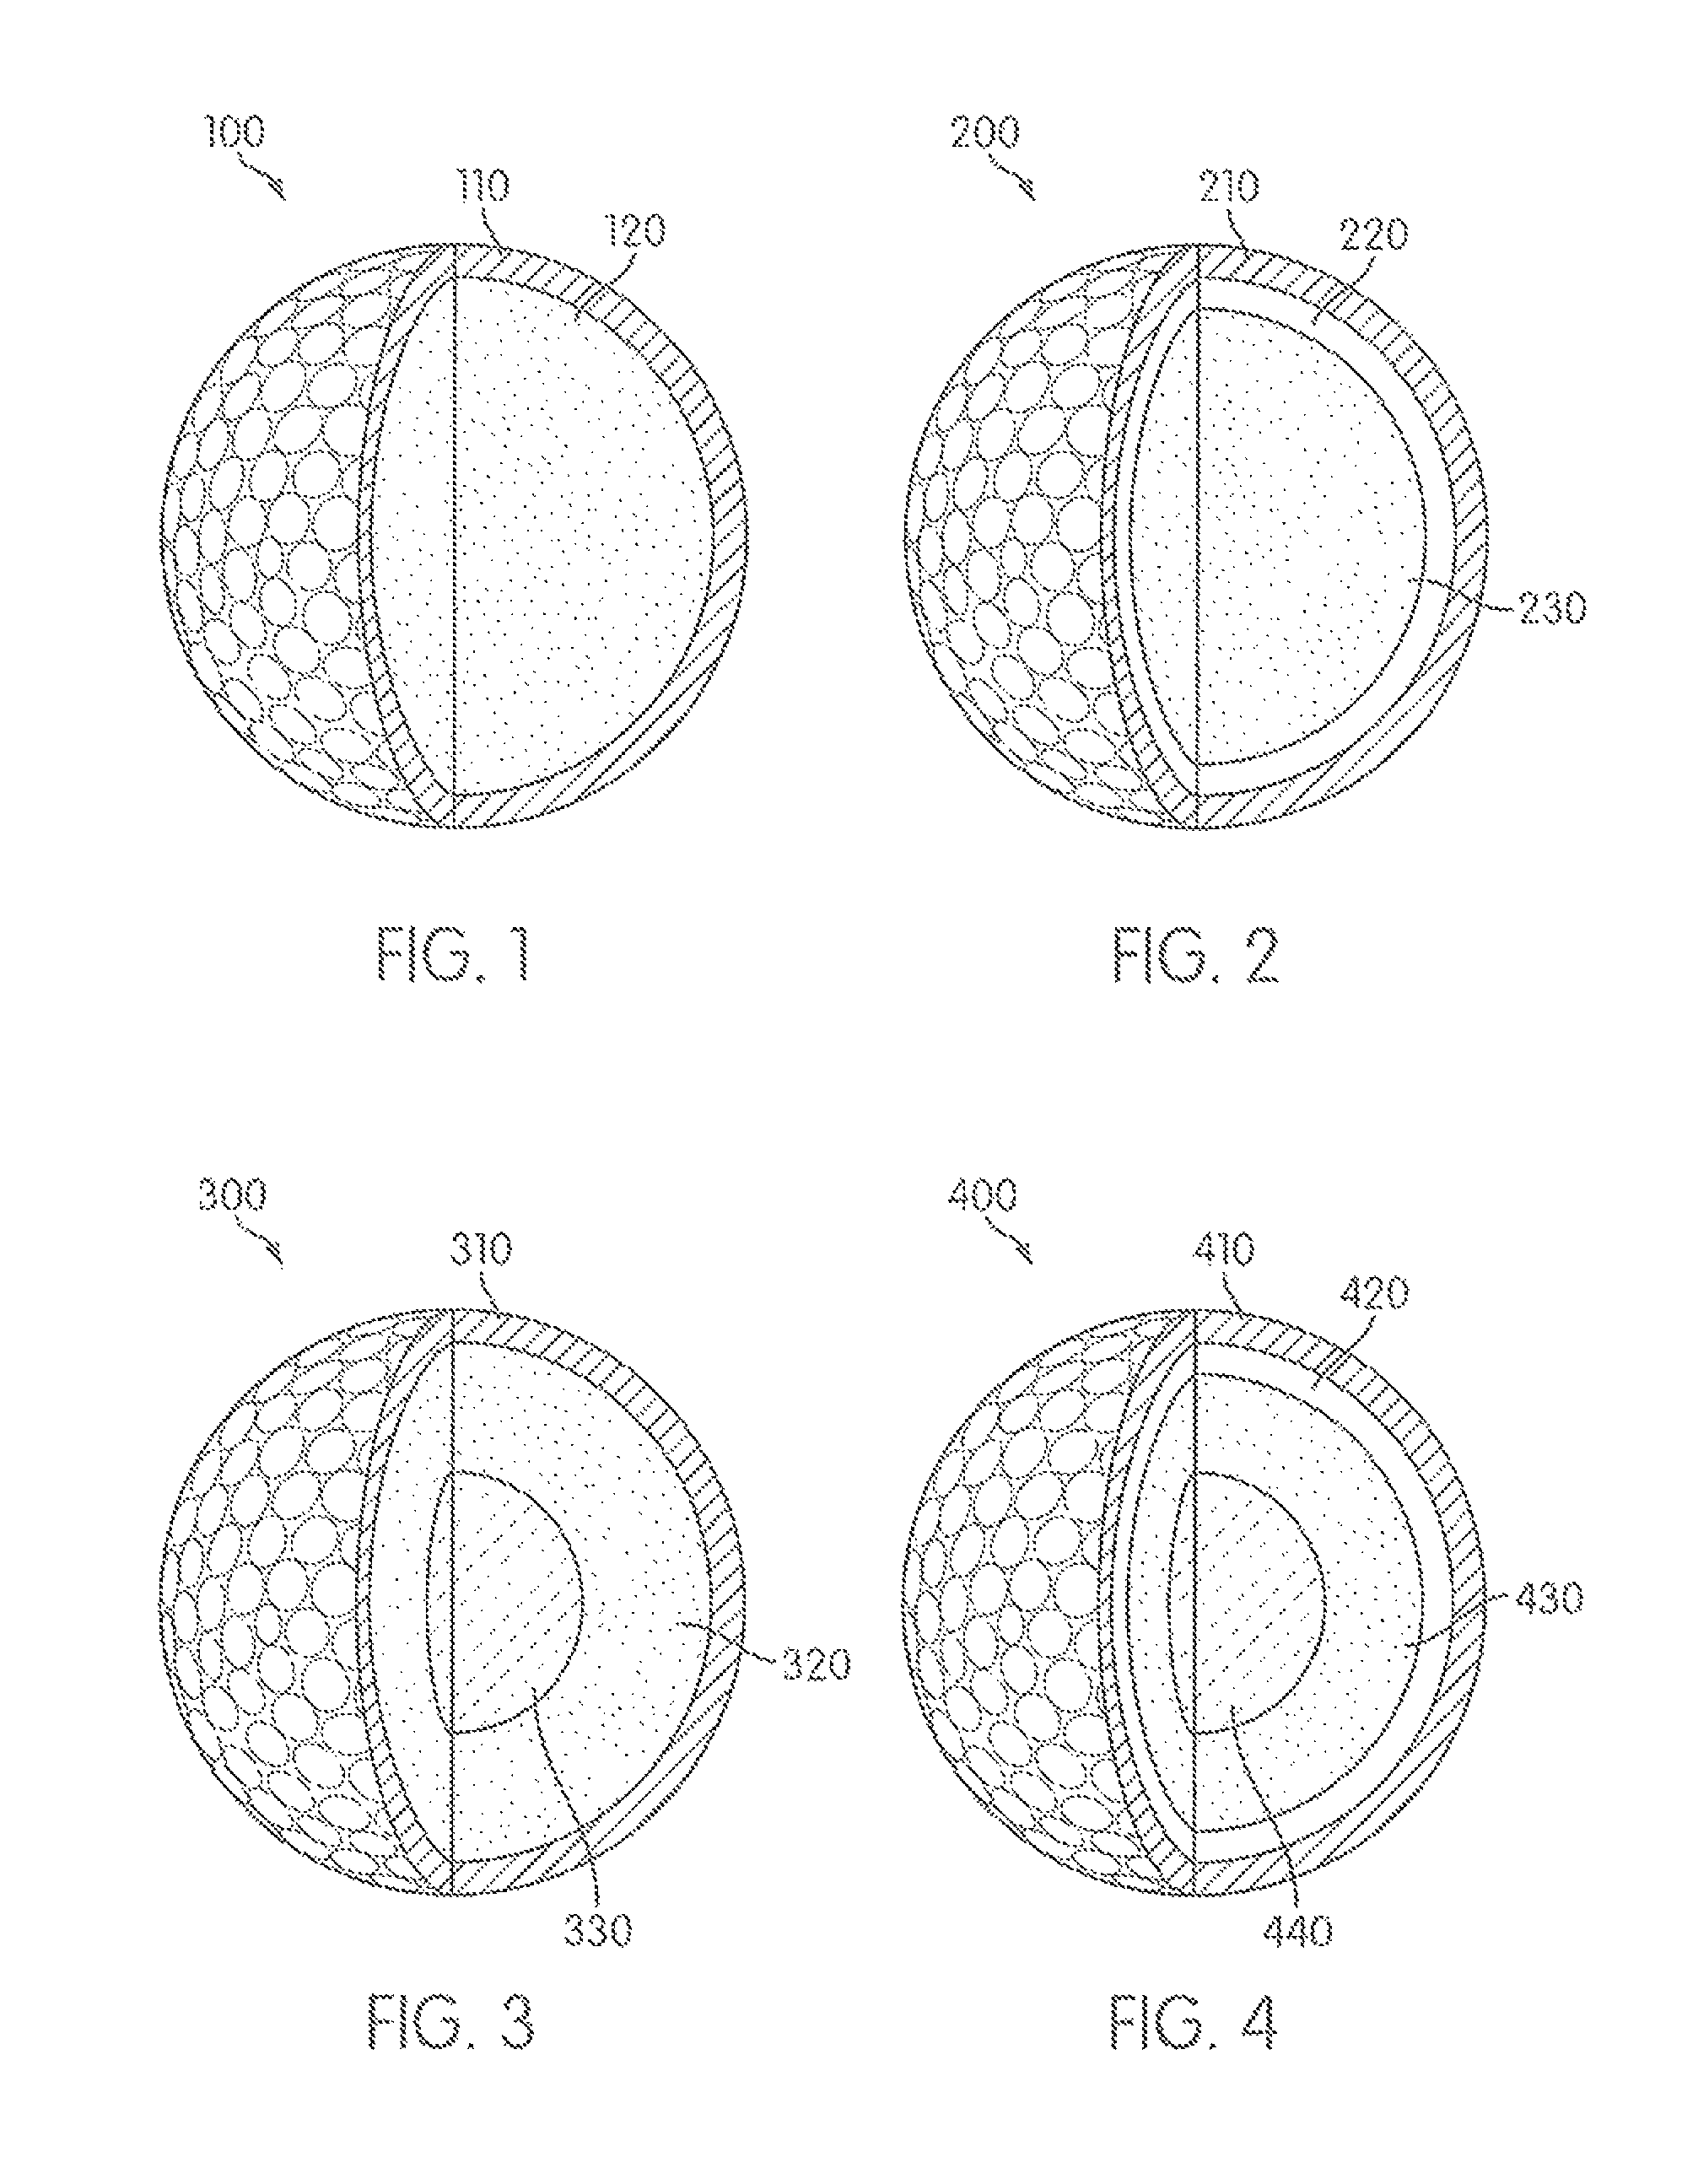 Golf ball with core material containing rubber and polyurethane